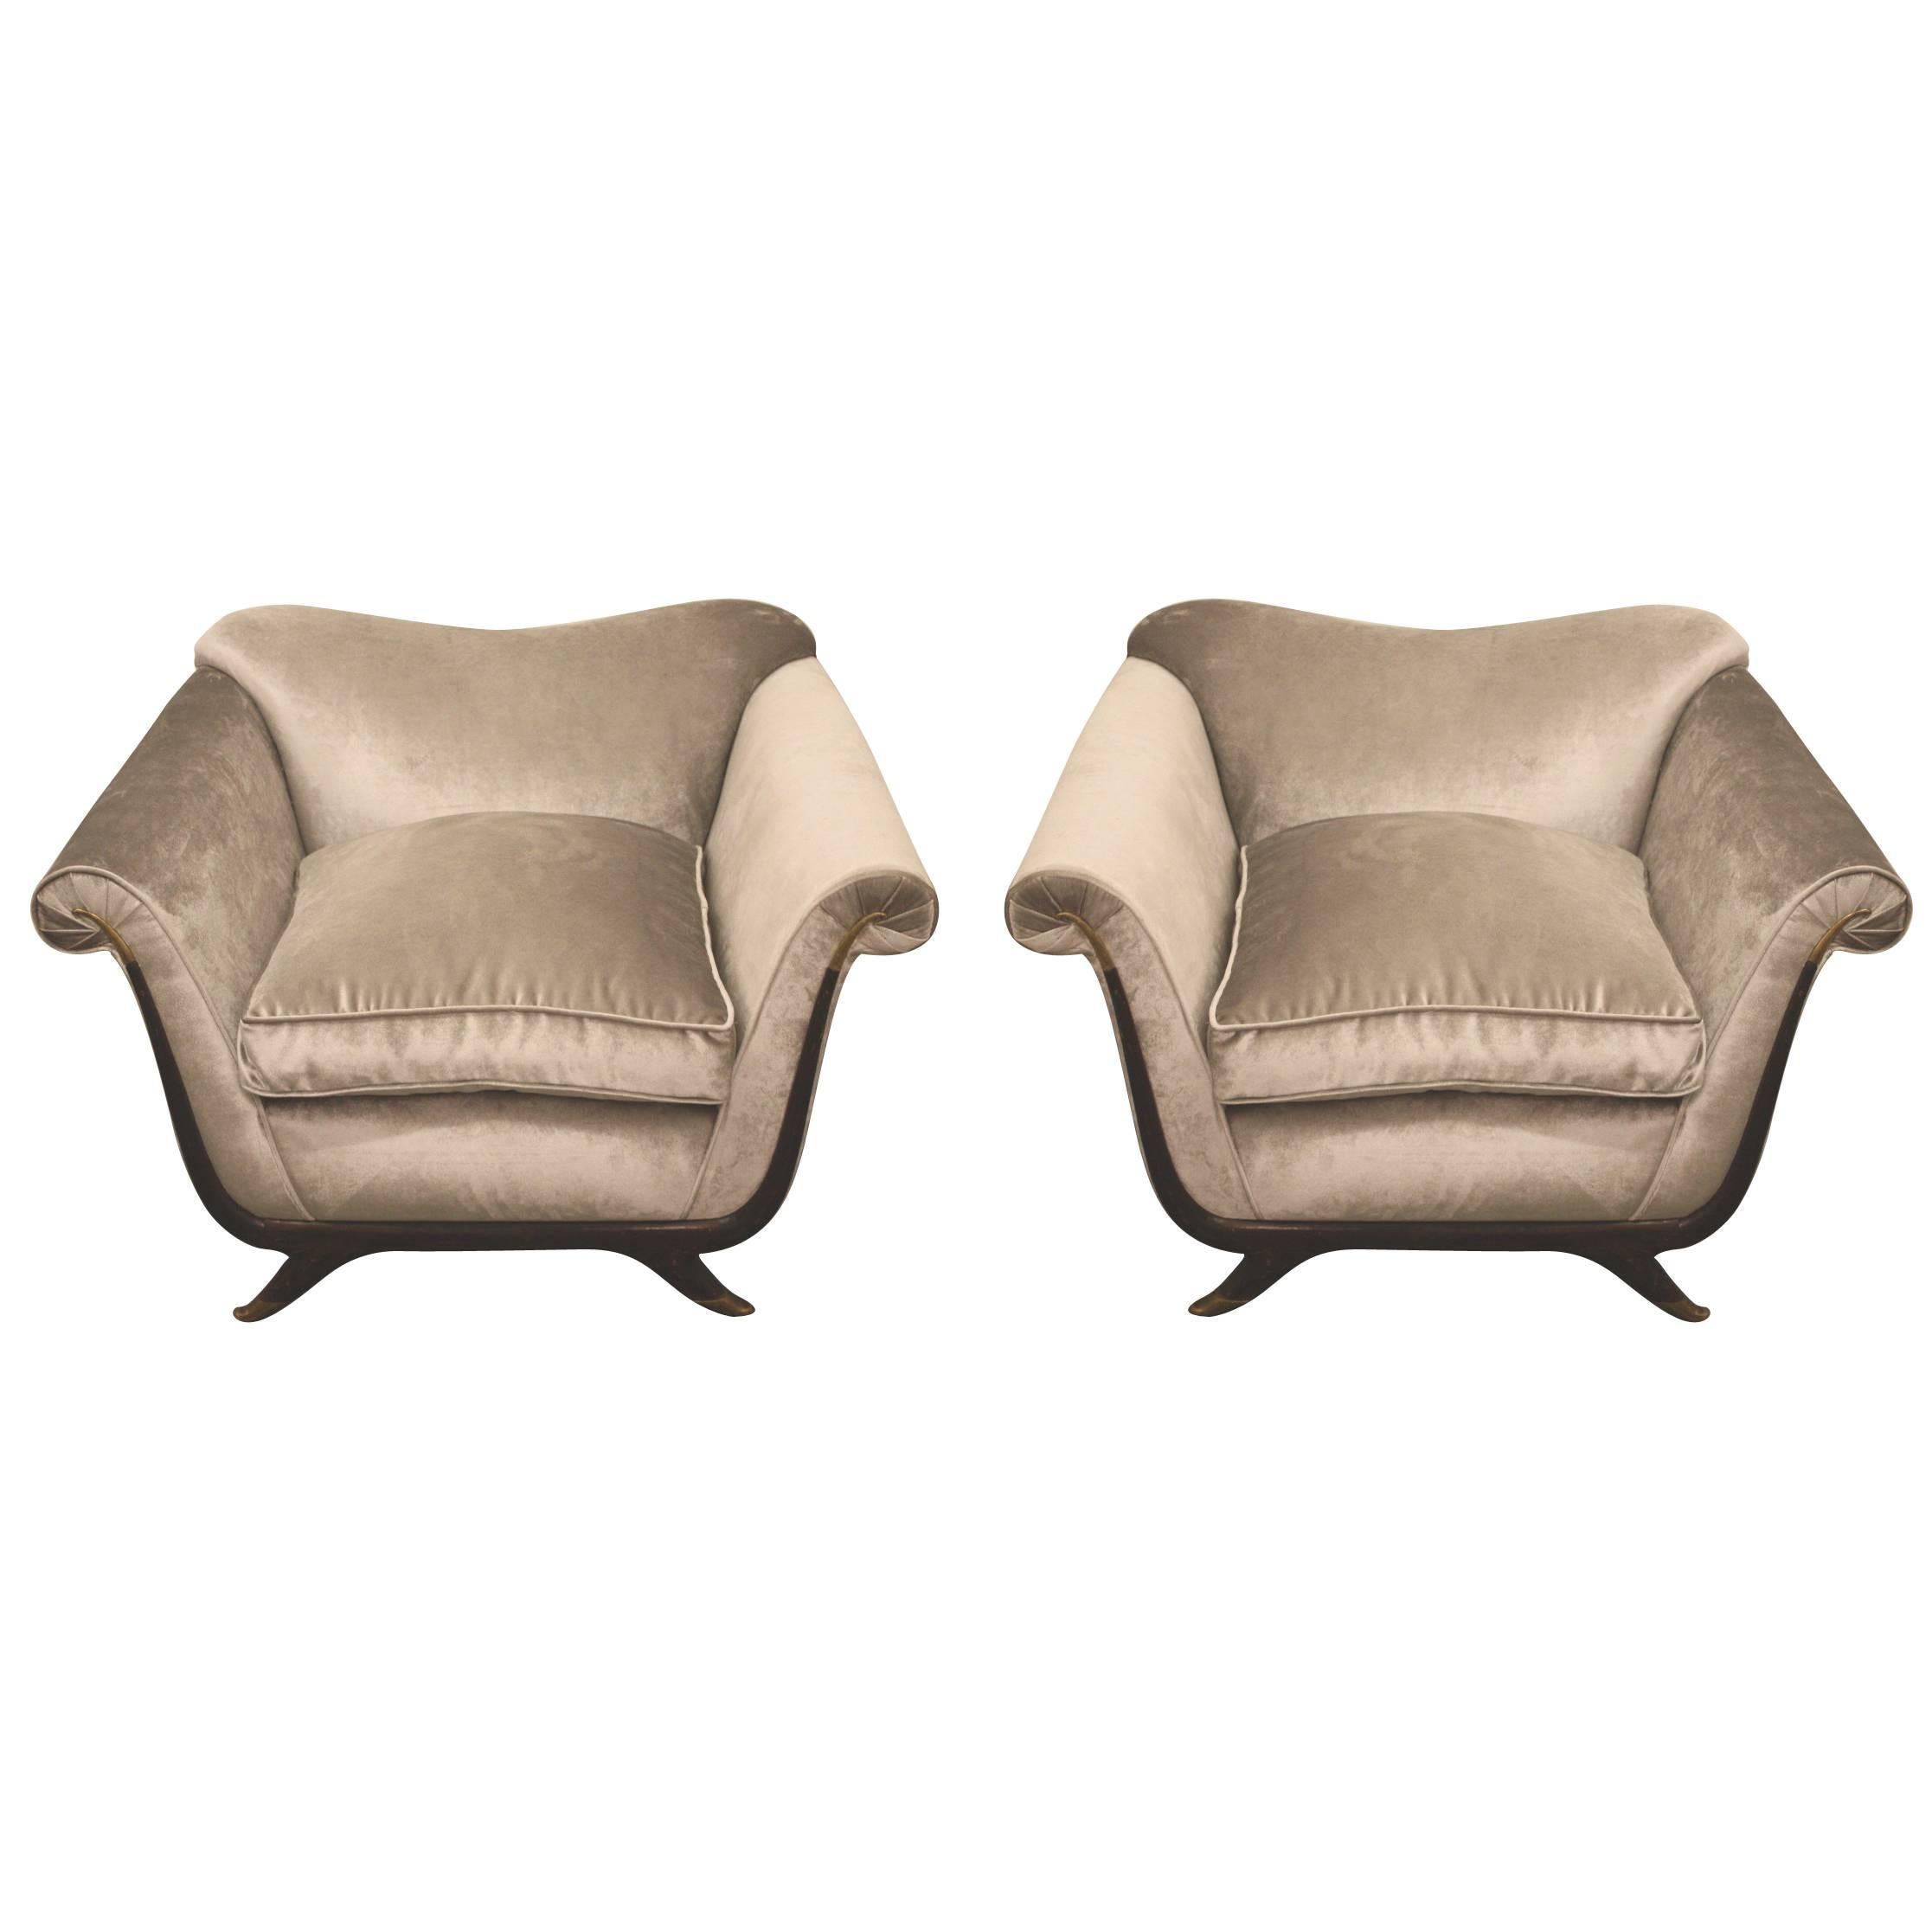 Pair of Armchairs by G. Ulrich, Italian, 1940s